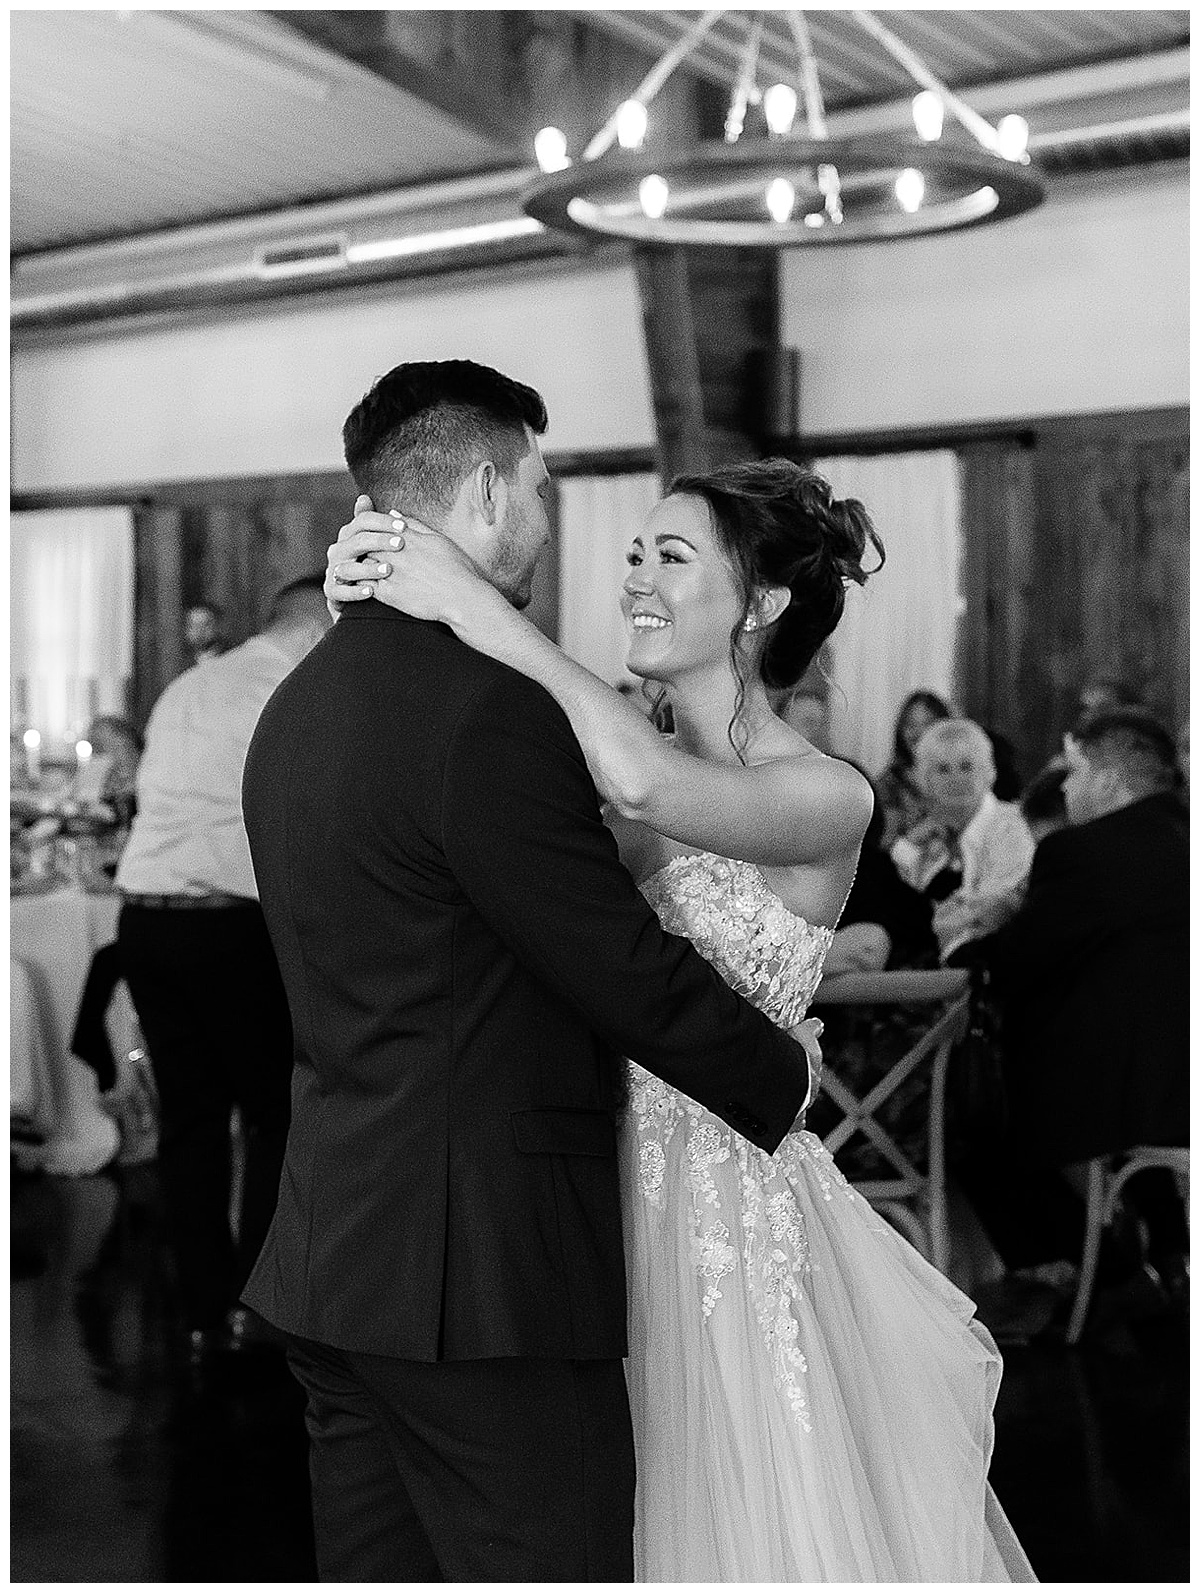 Man and woman dance together for  Kayla Bouren Photography